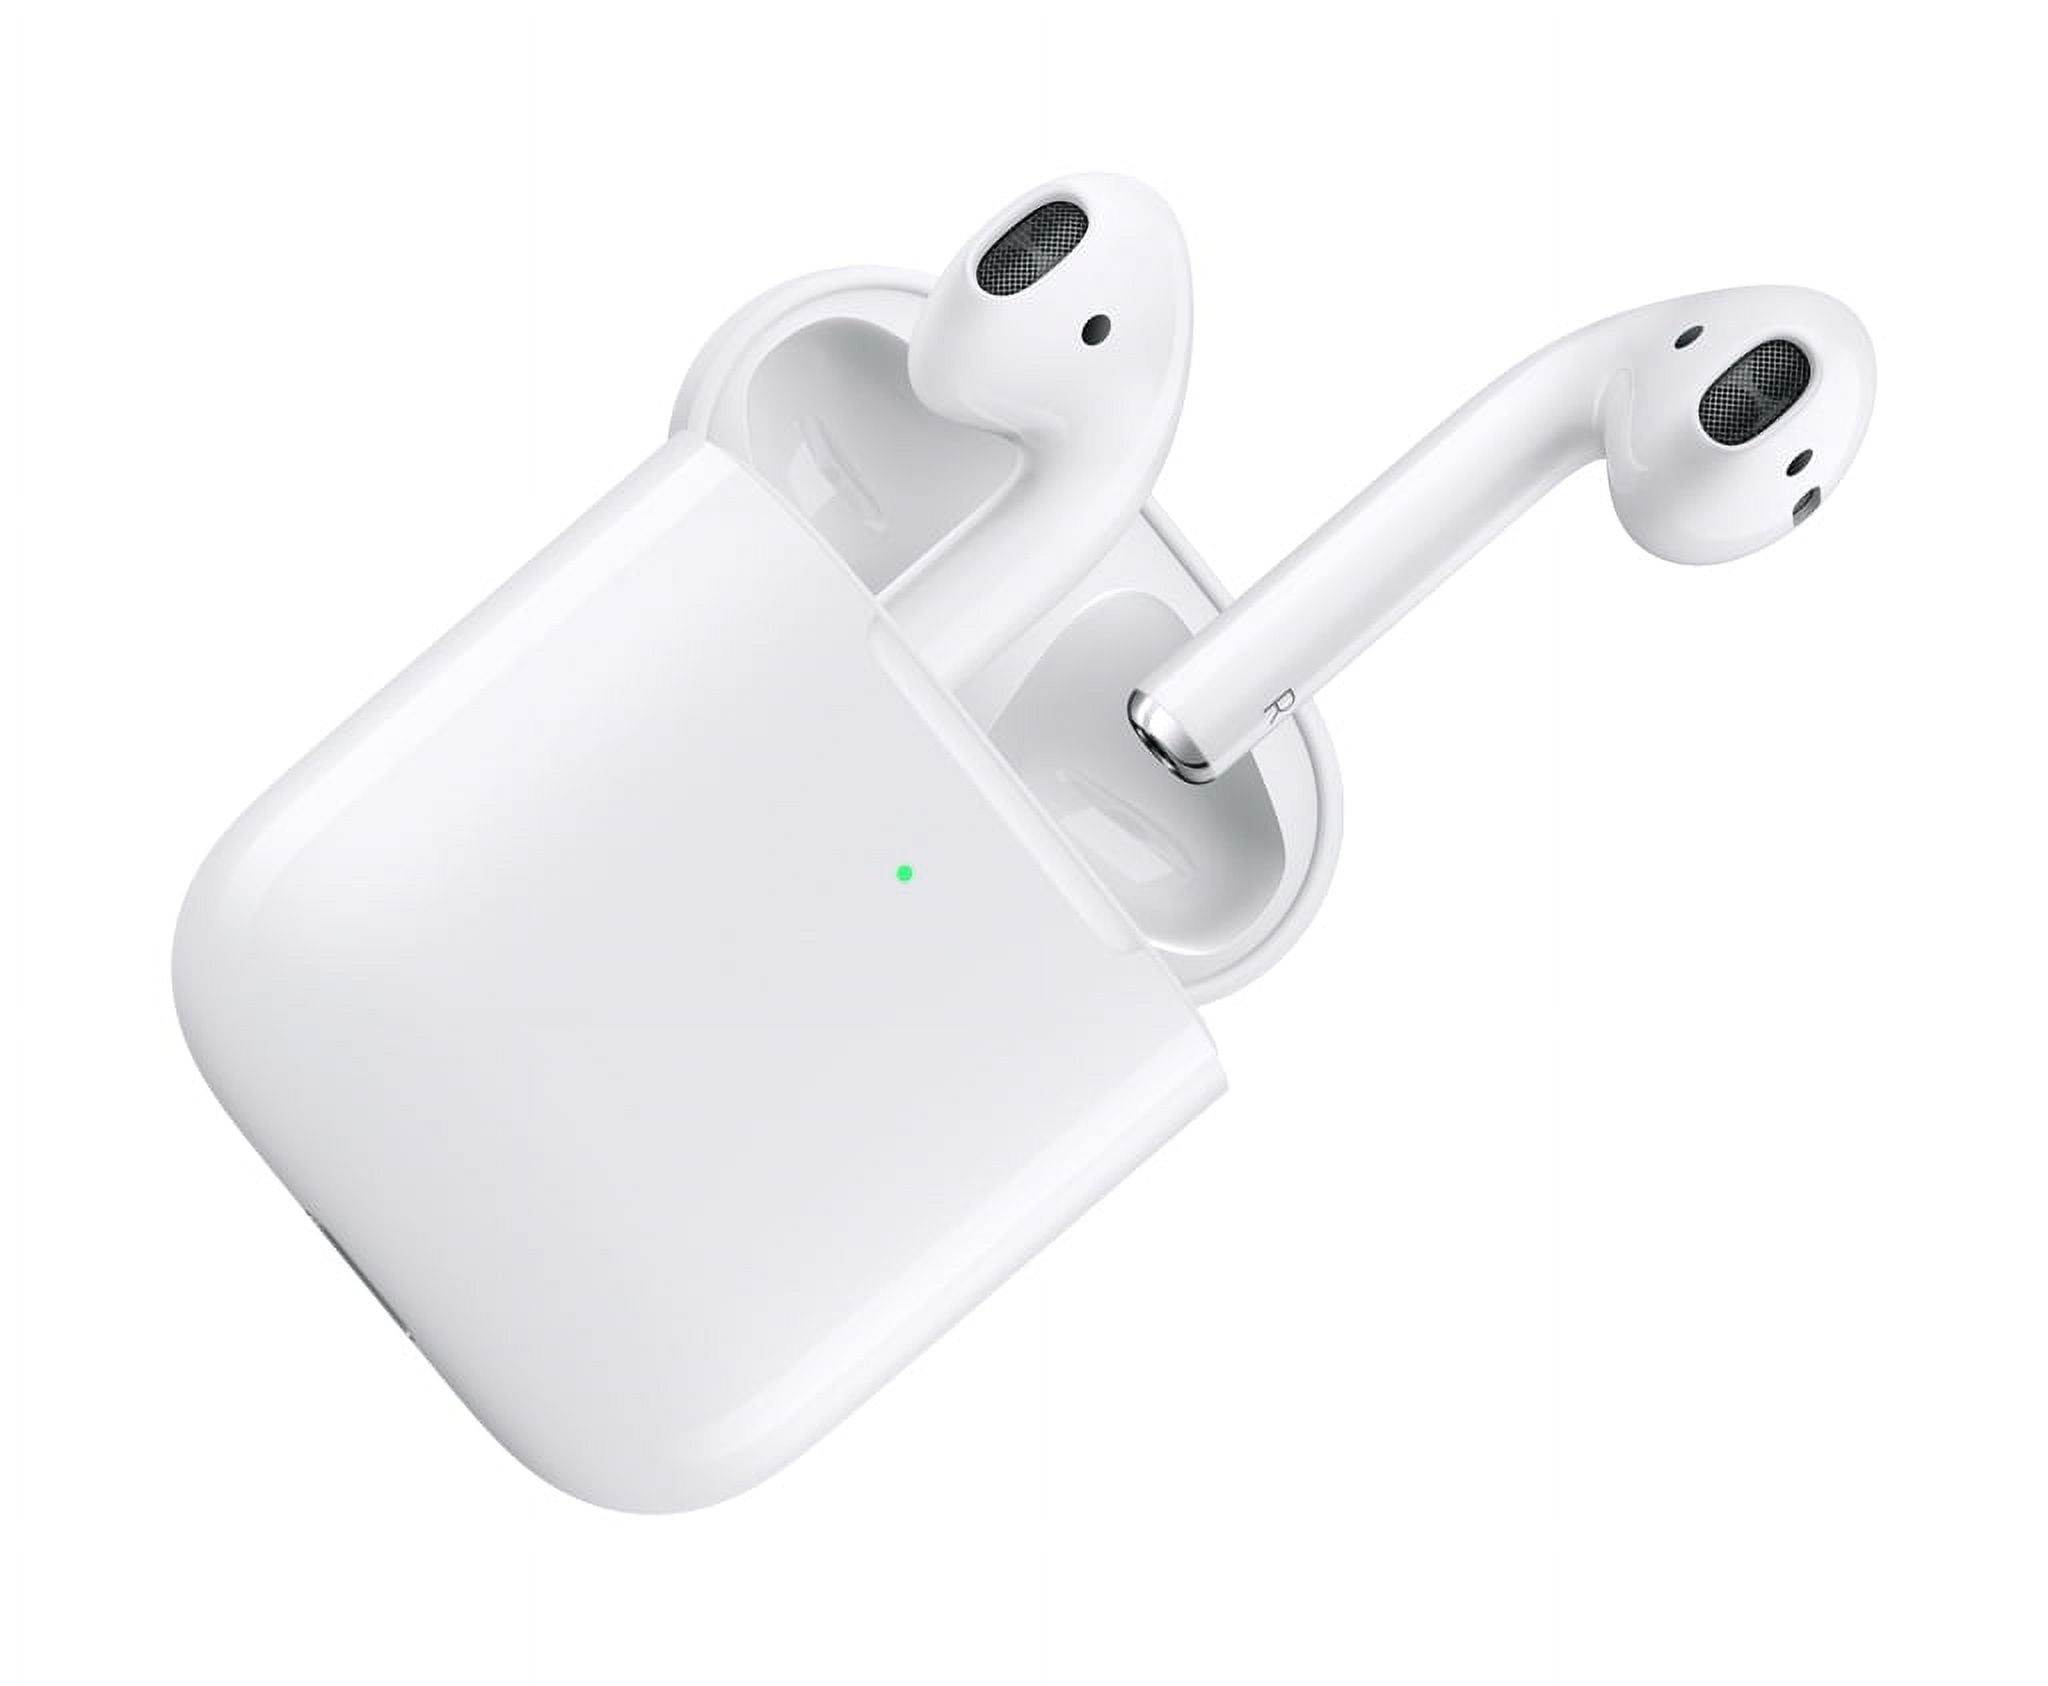 Used Apple AirPods Generation 2 with Wireless Charging Case